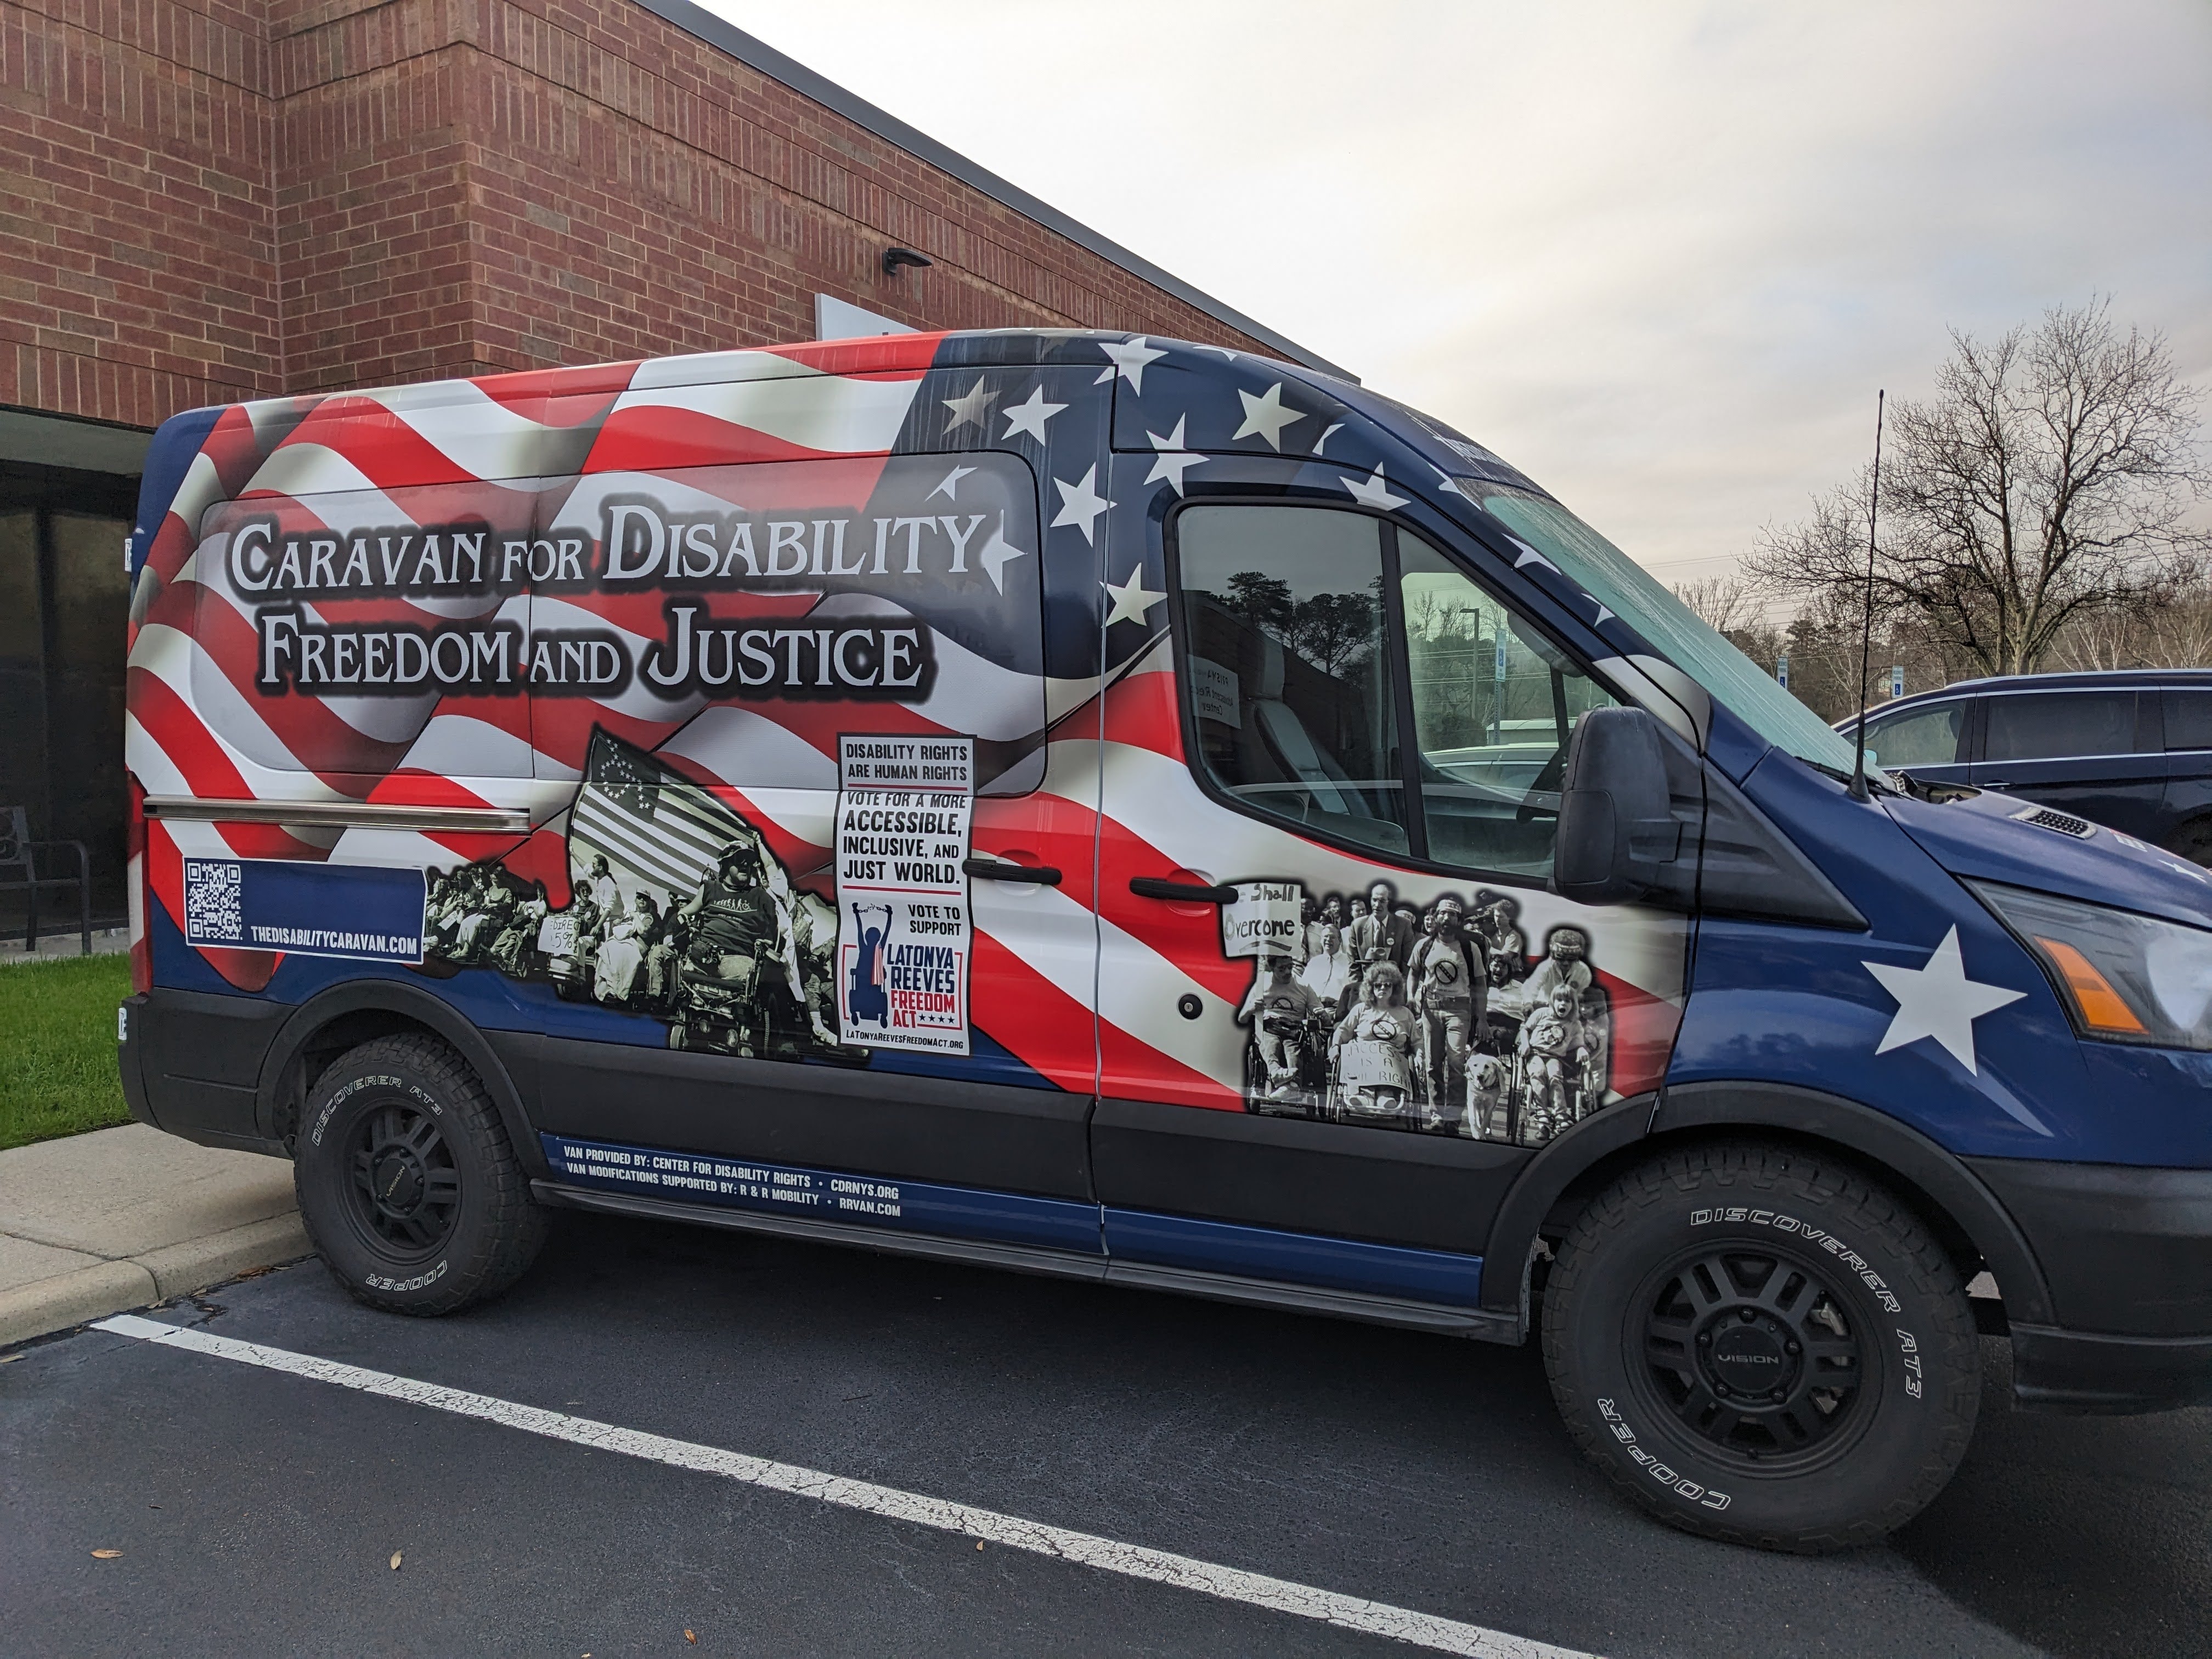 Caravan Van with images of disability rights history and large American Flag.